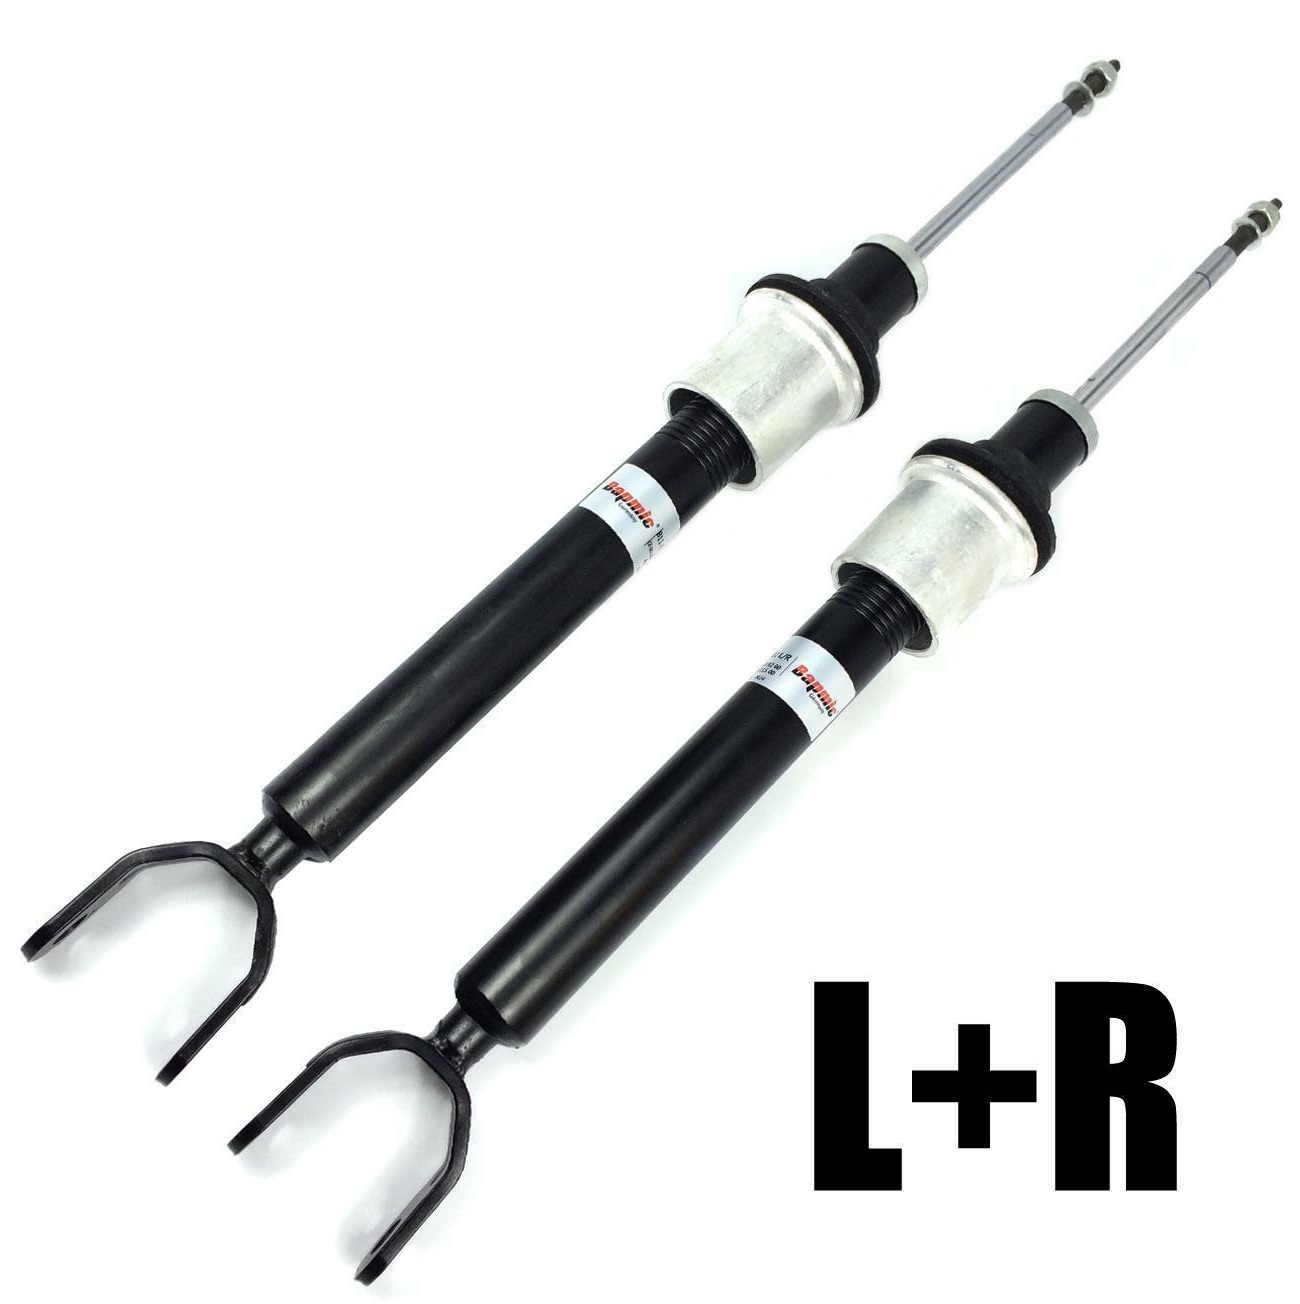 2Pcs Front Shock Absorbers for '02-'08 Mercedes W211 E200 E280 2113231500 German Made